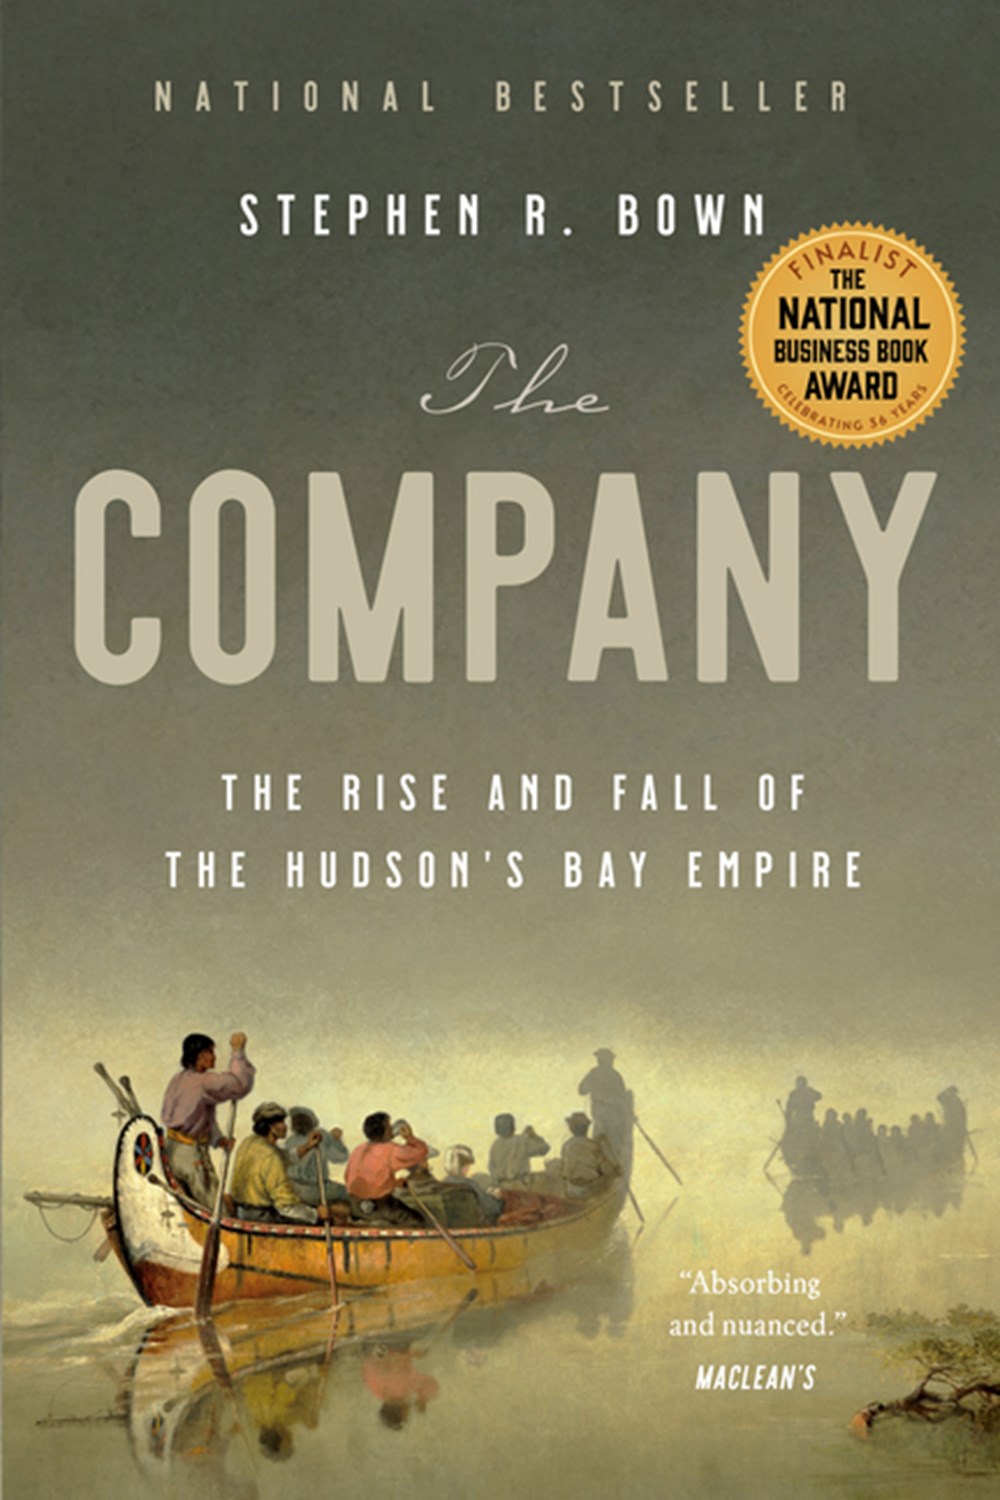 Company The Rise and Fall of the Hudson's Bay Empire